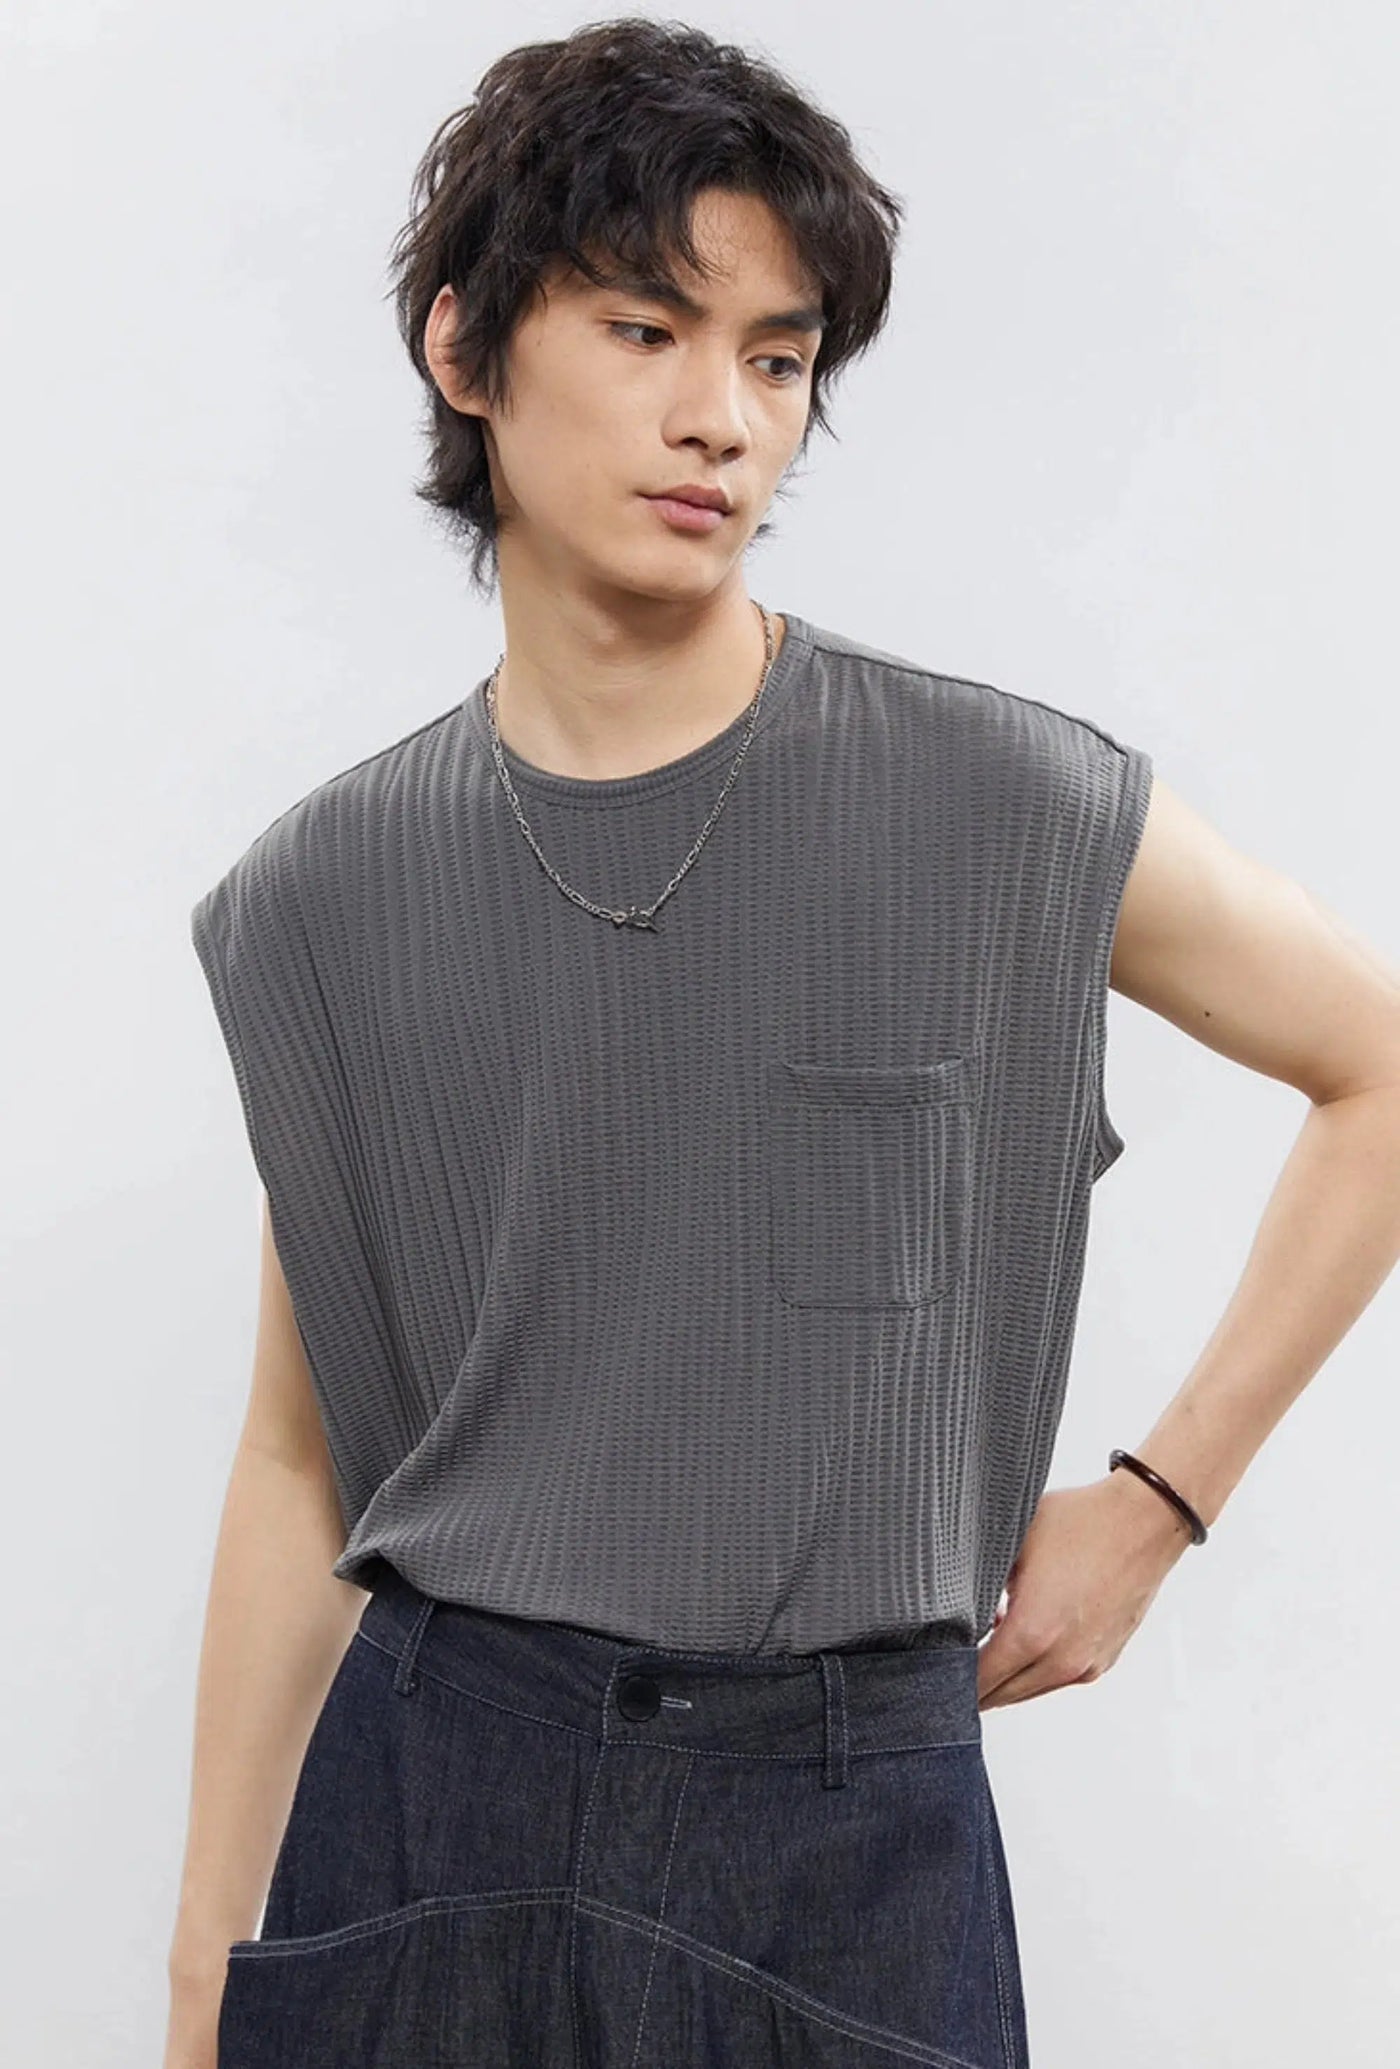 Opicloth Relaxed Fit Waffe Vest Korean Street Fashion Vest By Opicloth Shop Online at OH Vault